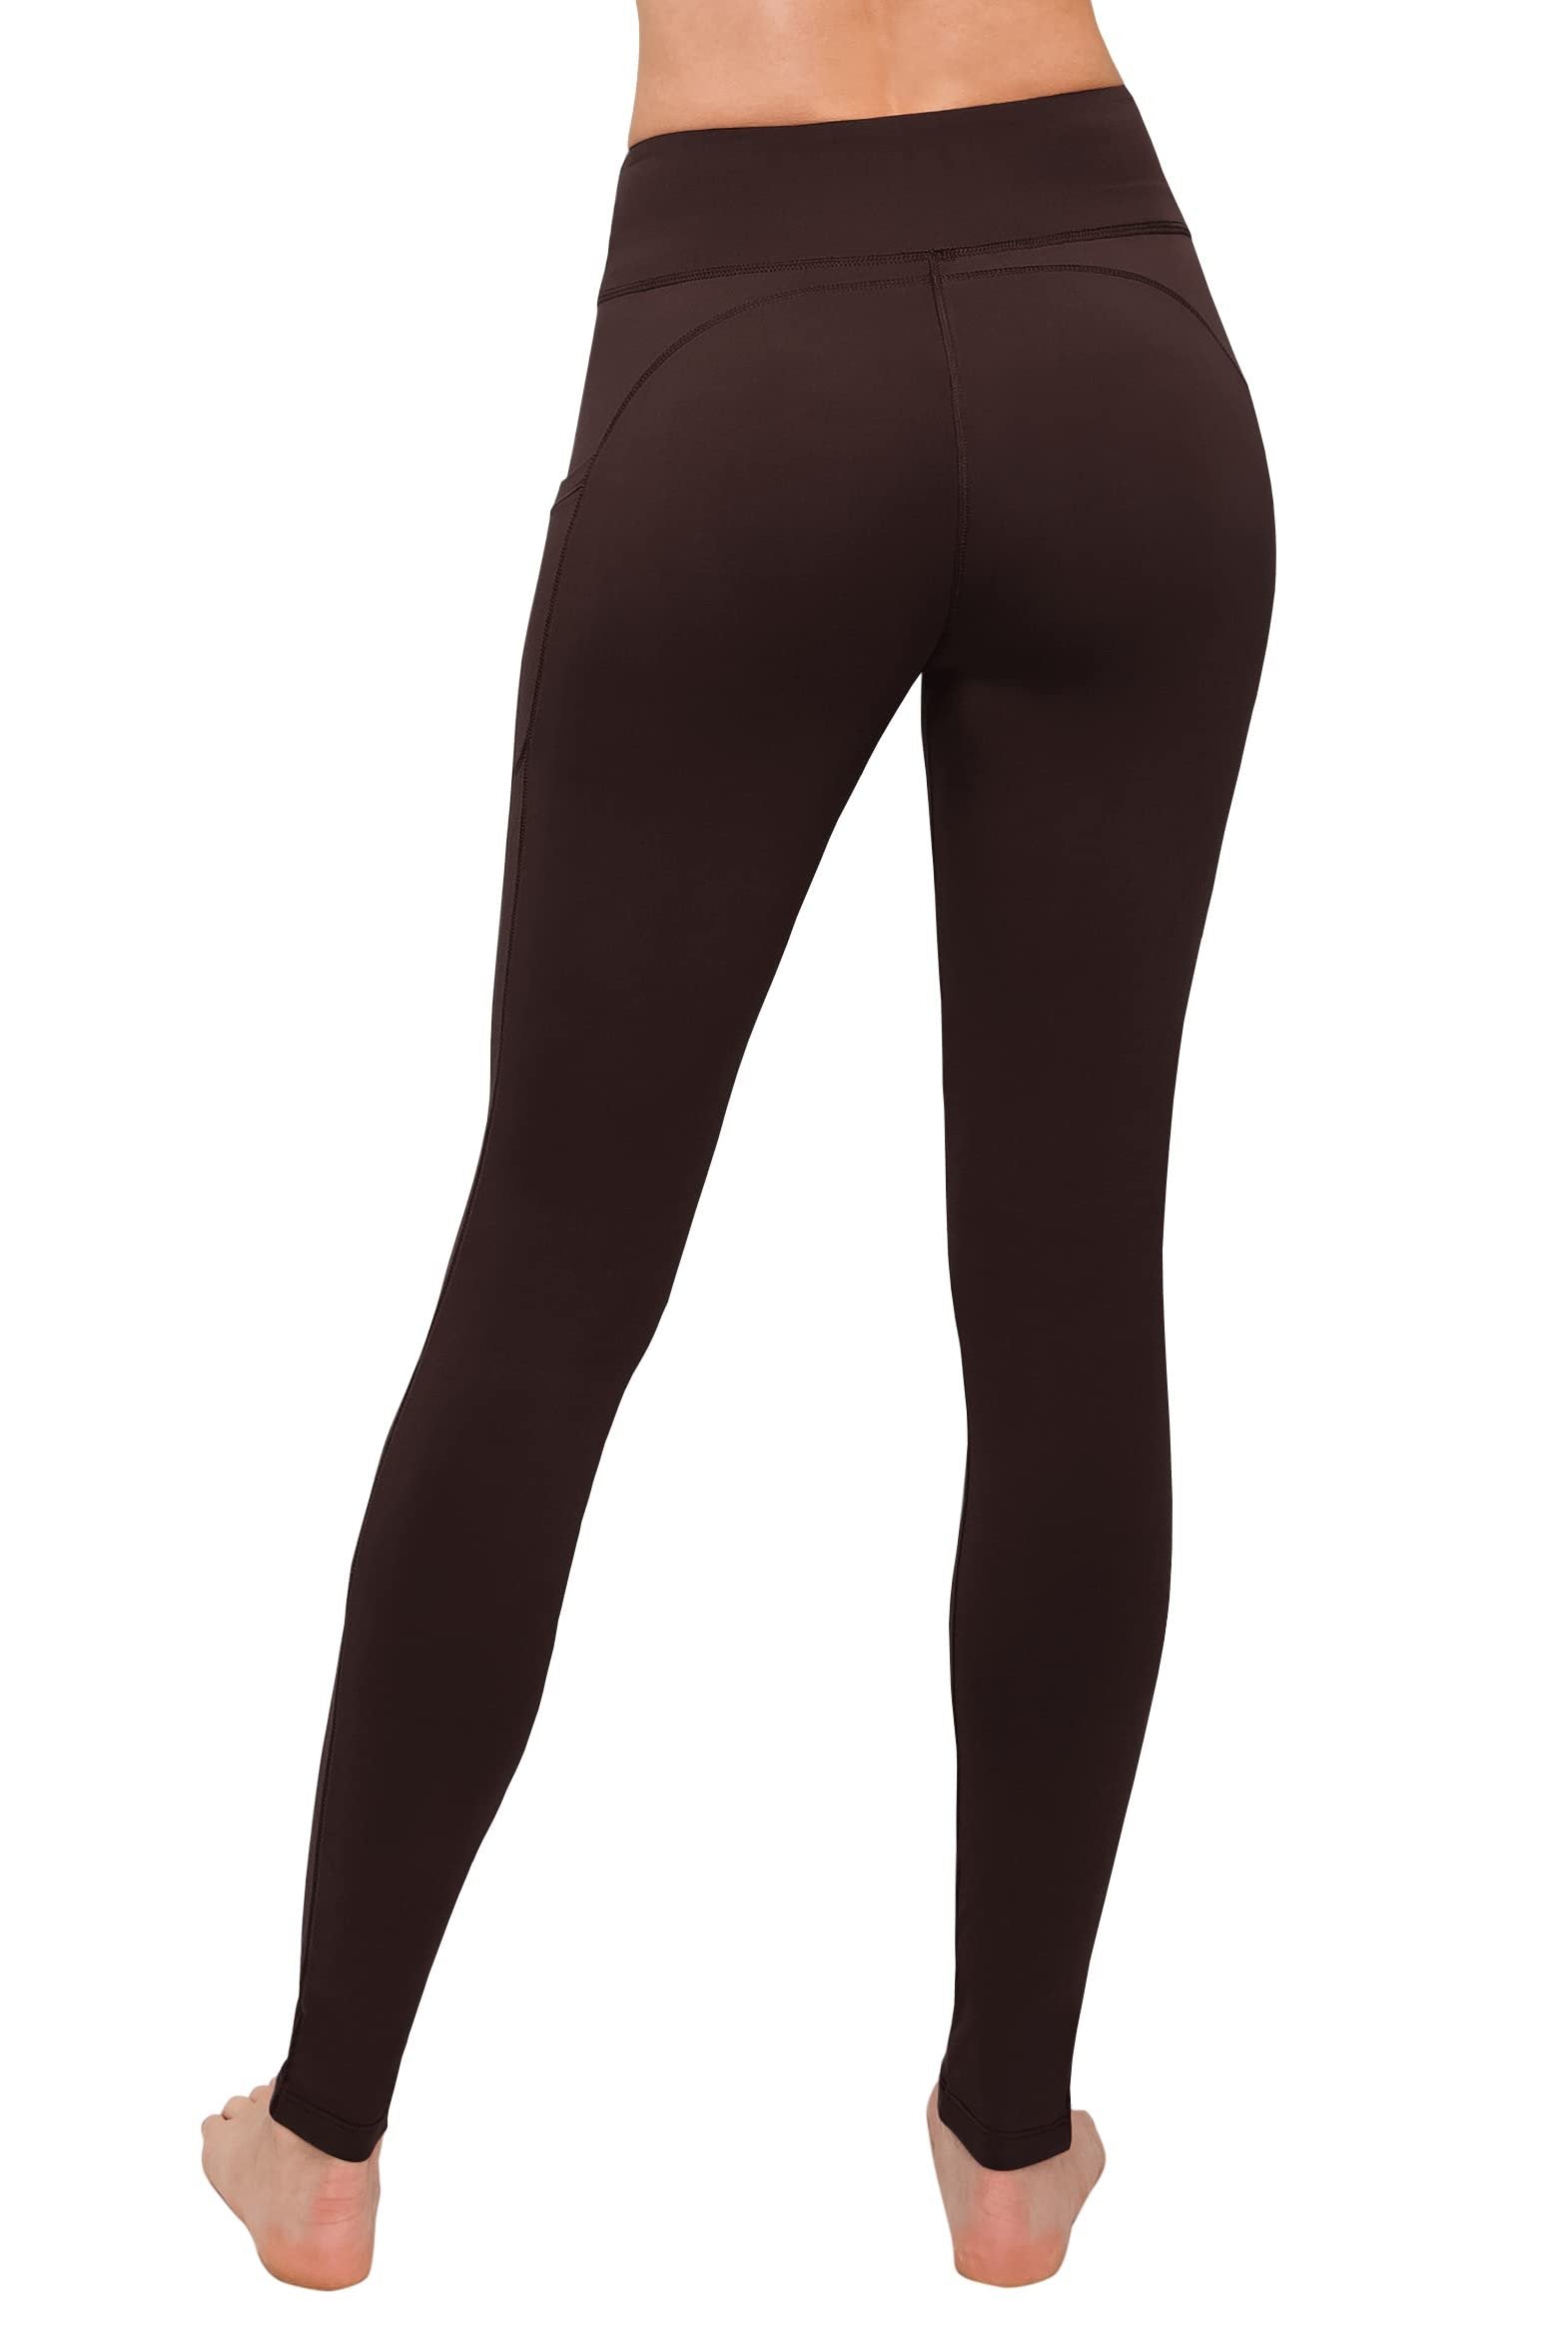 Brown Satina High Waisted Leggings with Pockets | 3 Inch Waistband | Plus & Regular Size Women